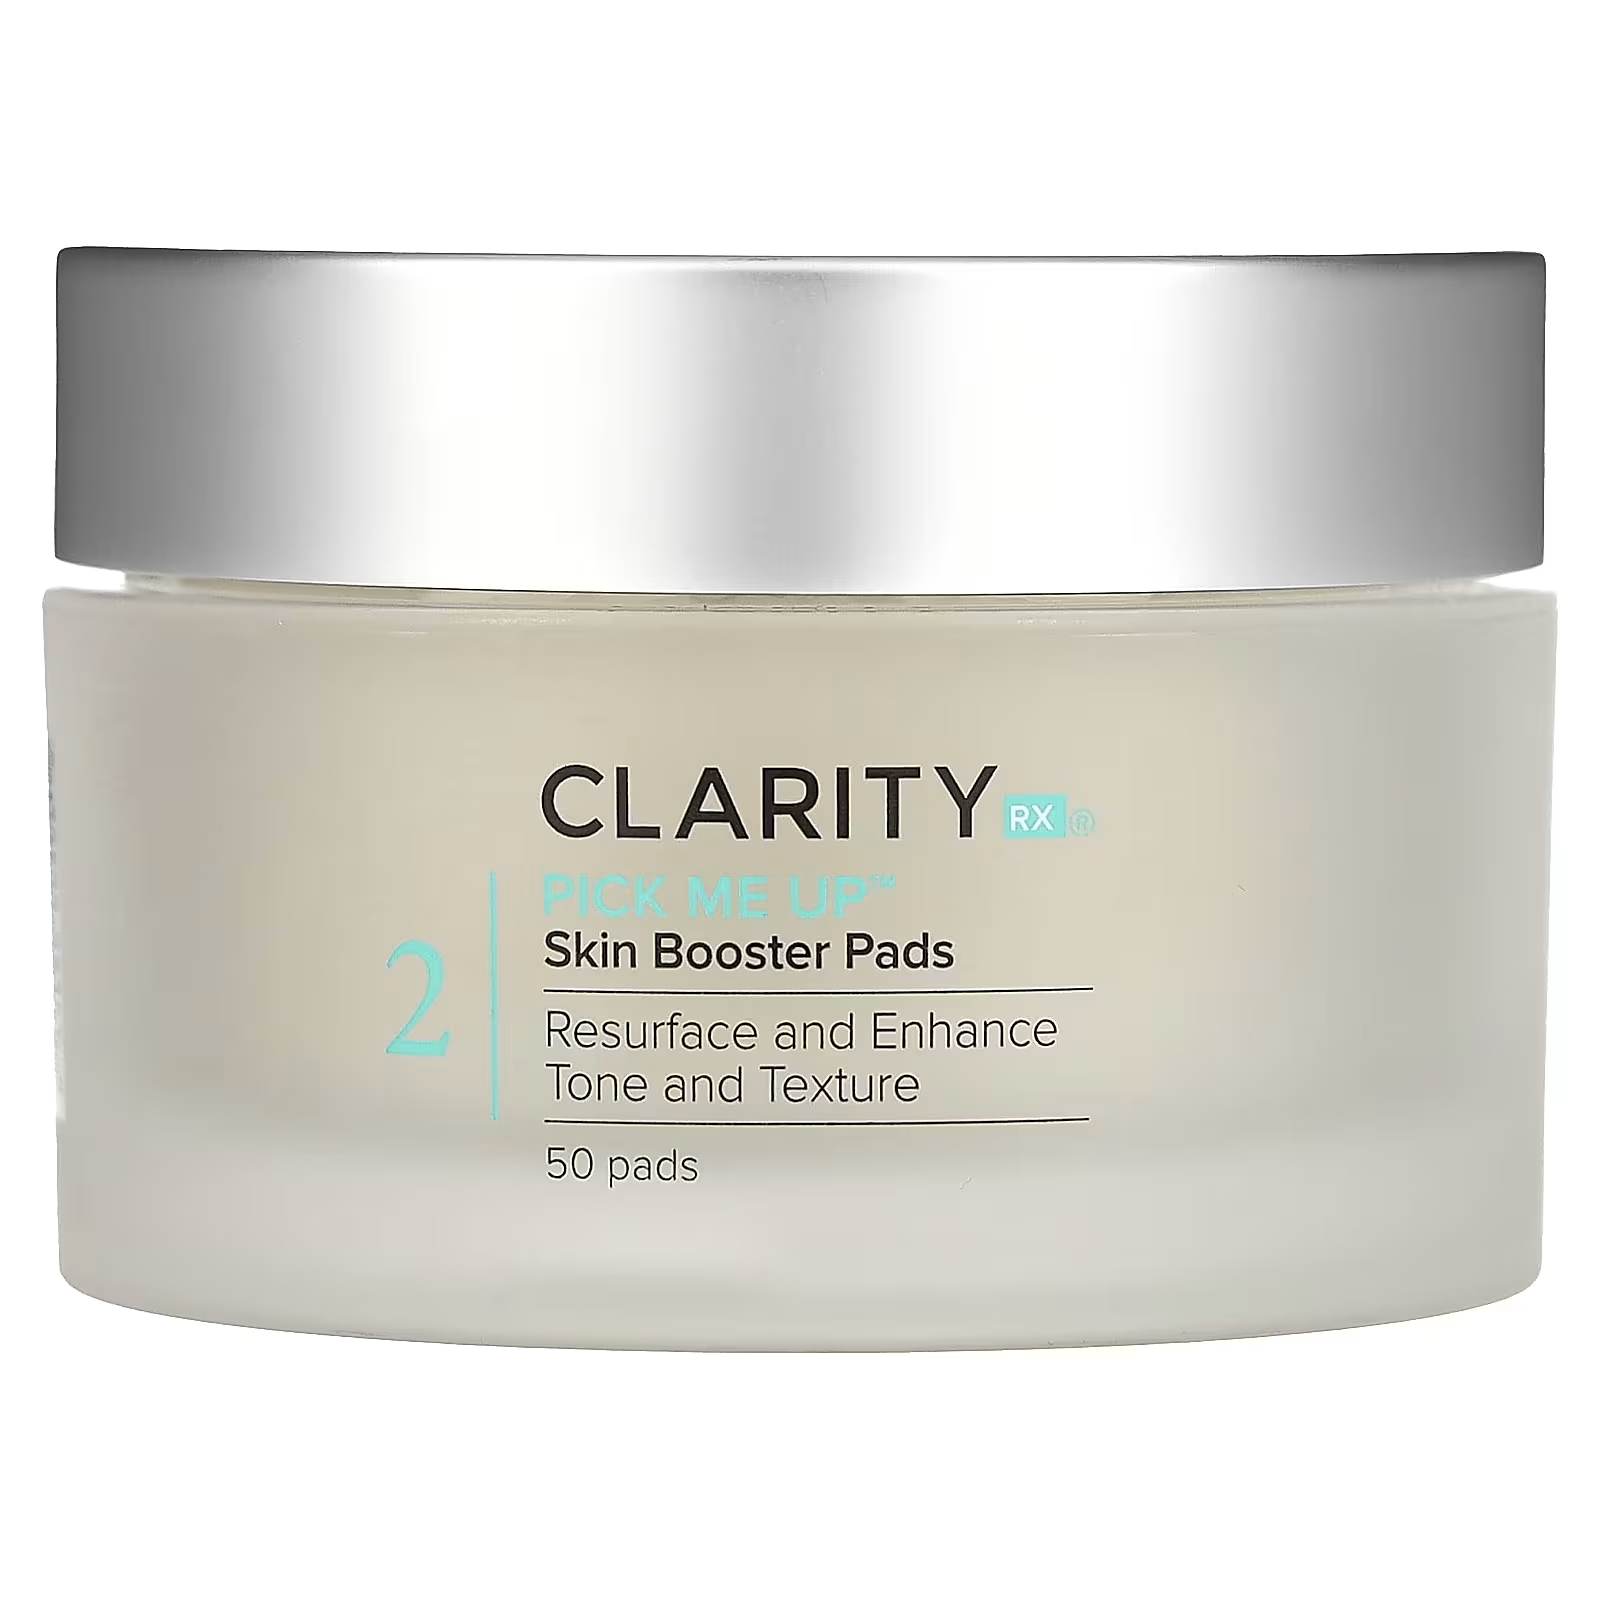 ClarityRx Pick Me Up Skin Booster Pads 50 подушечек pick me up bunny